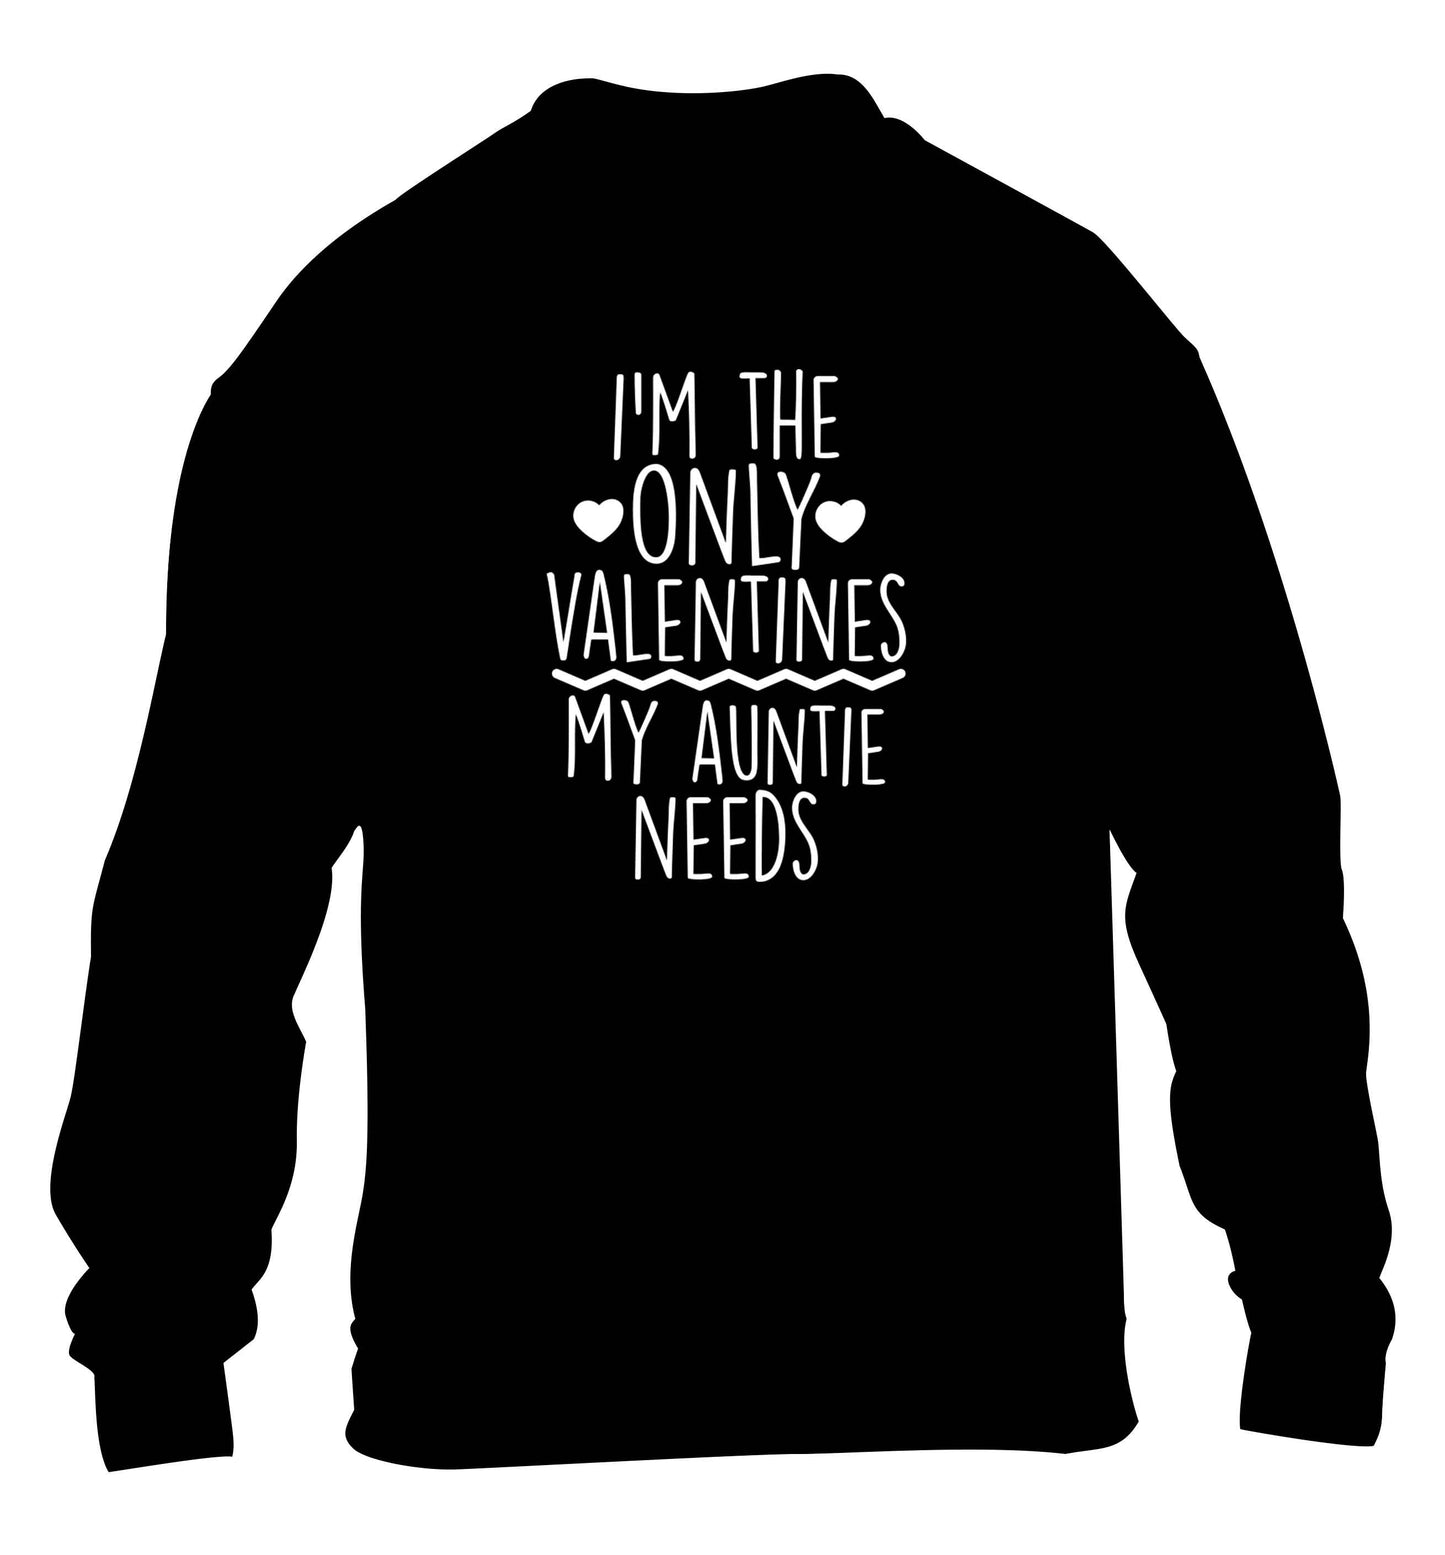 I'm the only valentines my auntie needs children's black sweater 12-13 Years